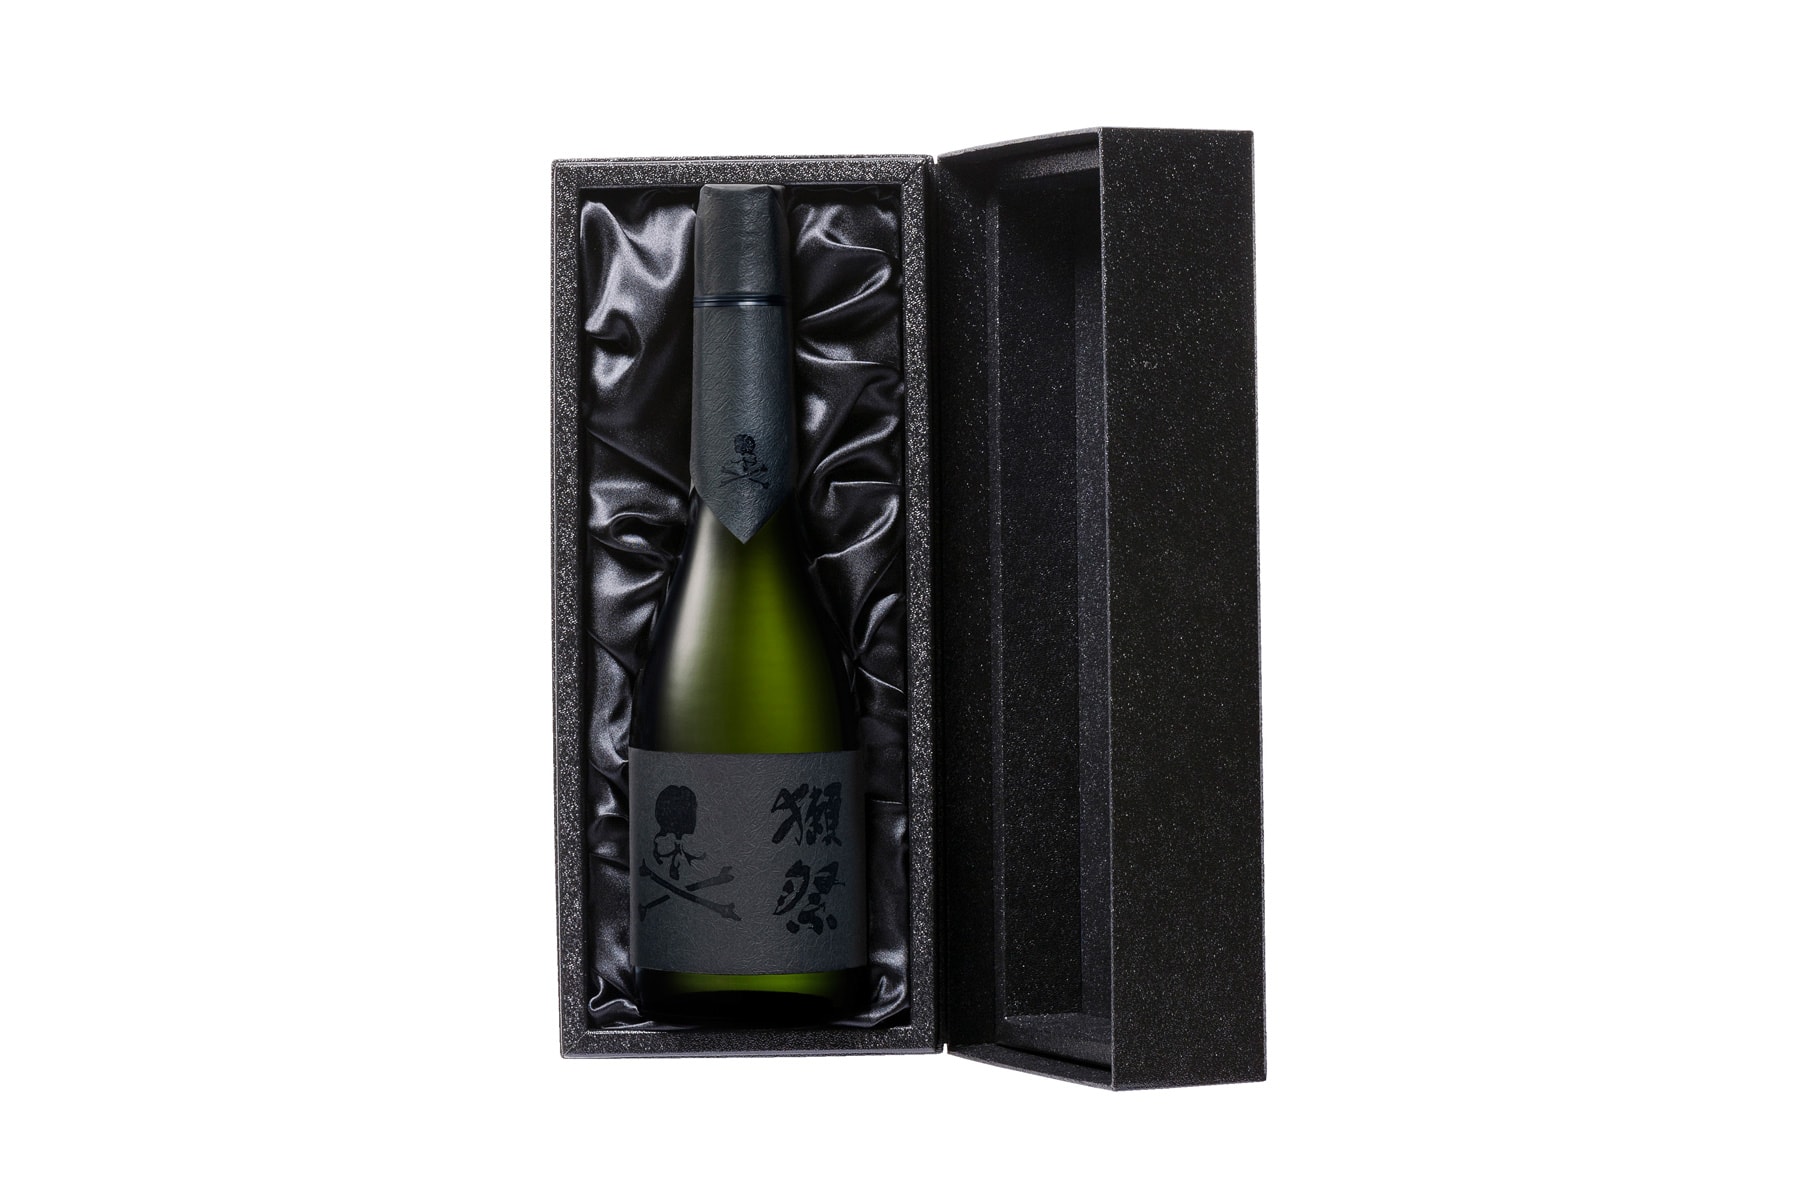 mastermind Japan x Dassai Sake Collection collaboration liquor bottle 720 ml 2300 ml packaging price release date info price malaysia isetan the japan store